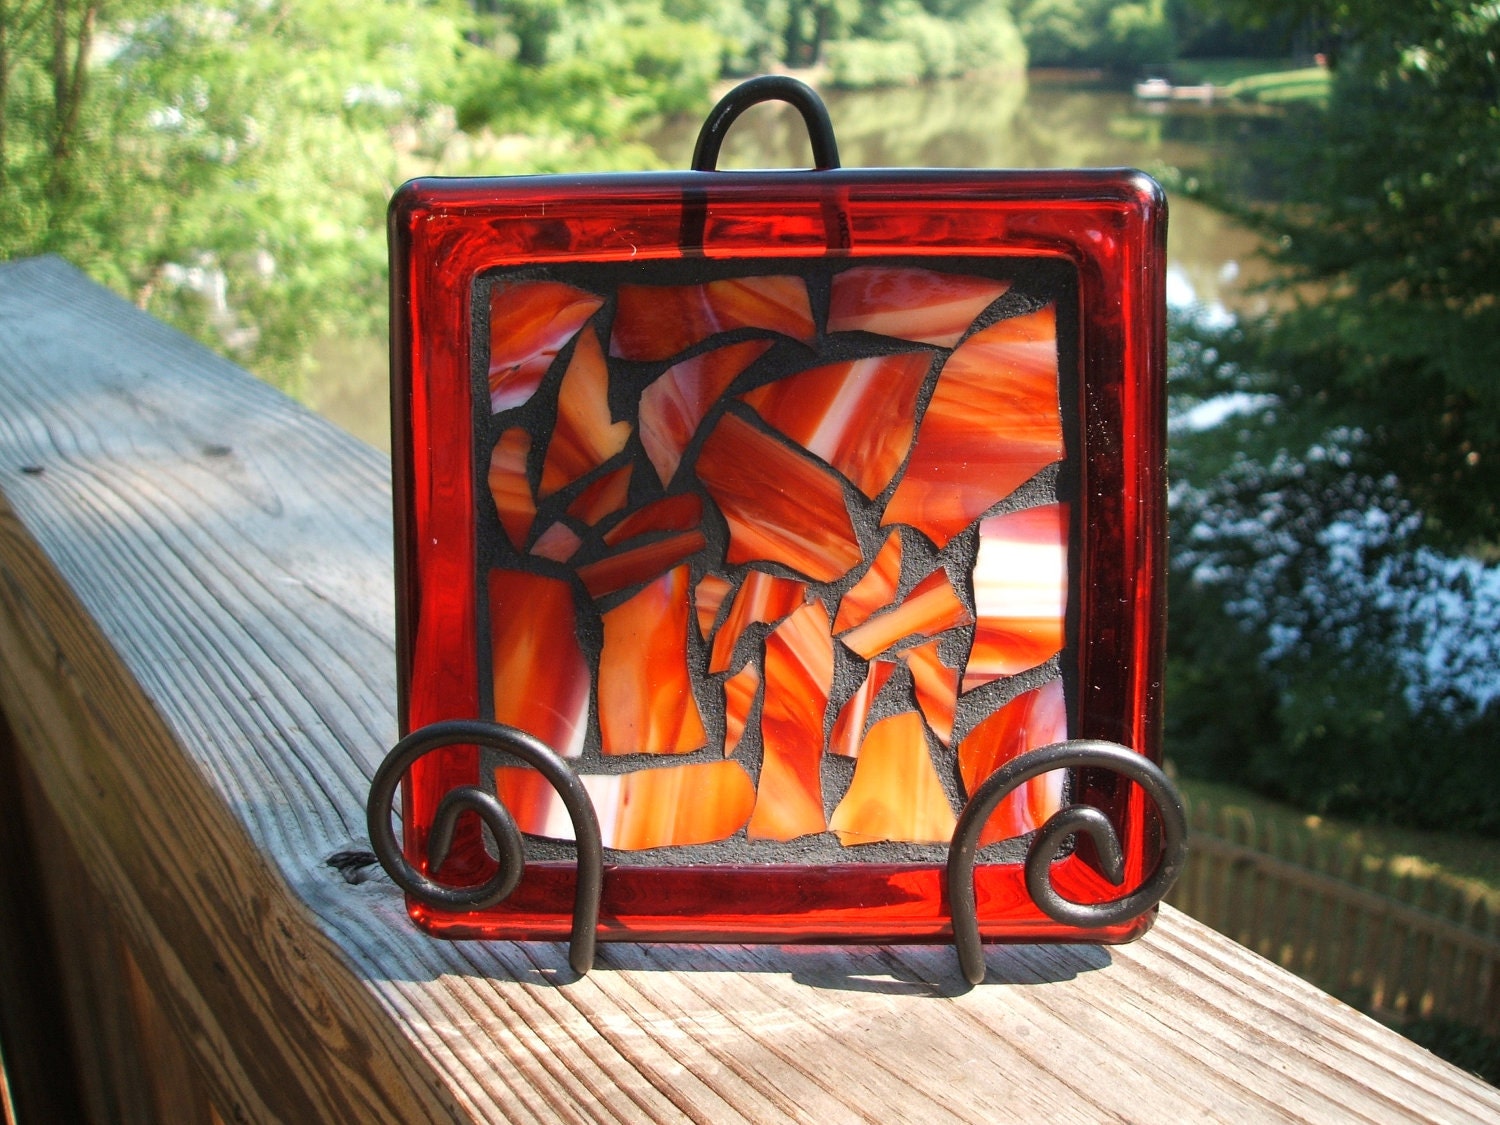 Mosaic Trivet/Candleholder/Decorative Accessory w Red, Orange & White Stained Glass (black stand incl)...SALE...was 18.00, now 15.00 - WiseCrackinMosaics